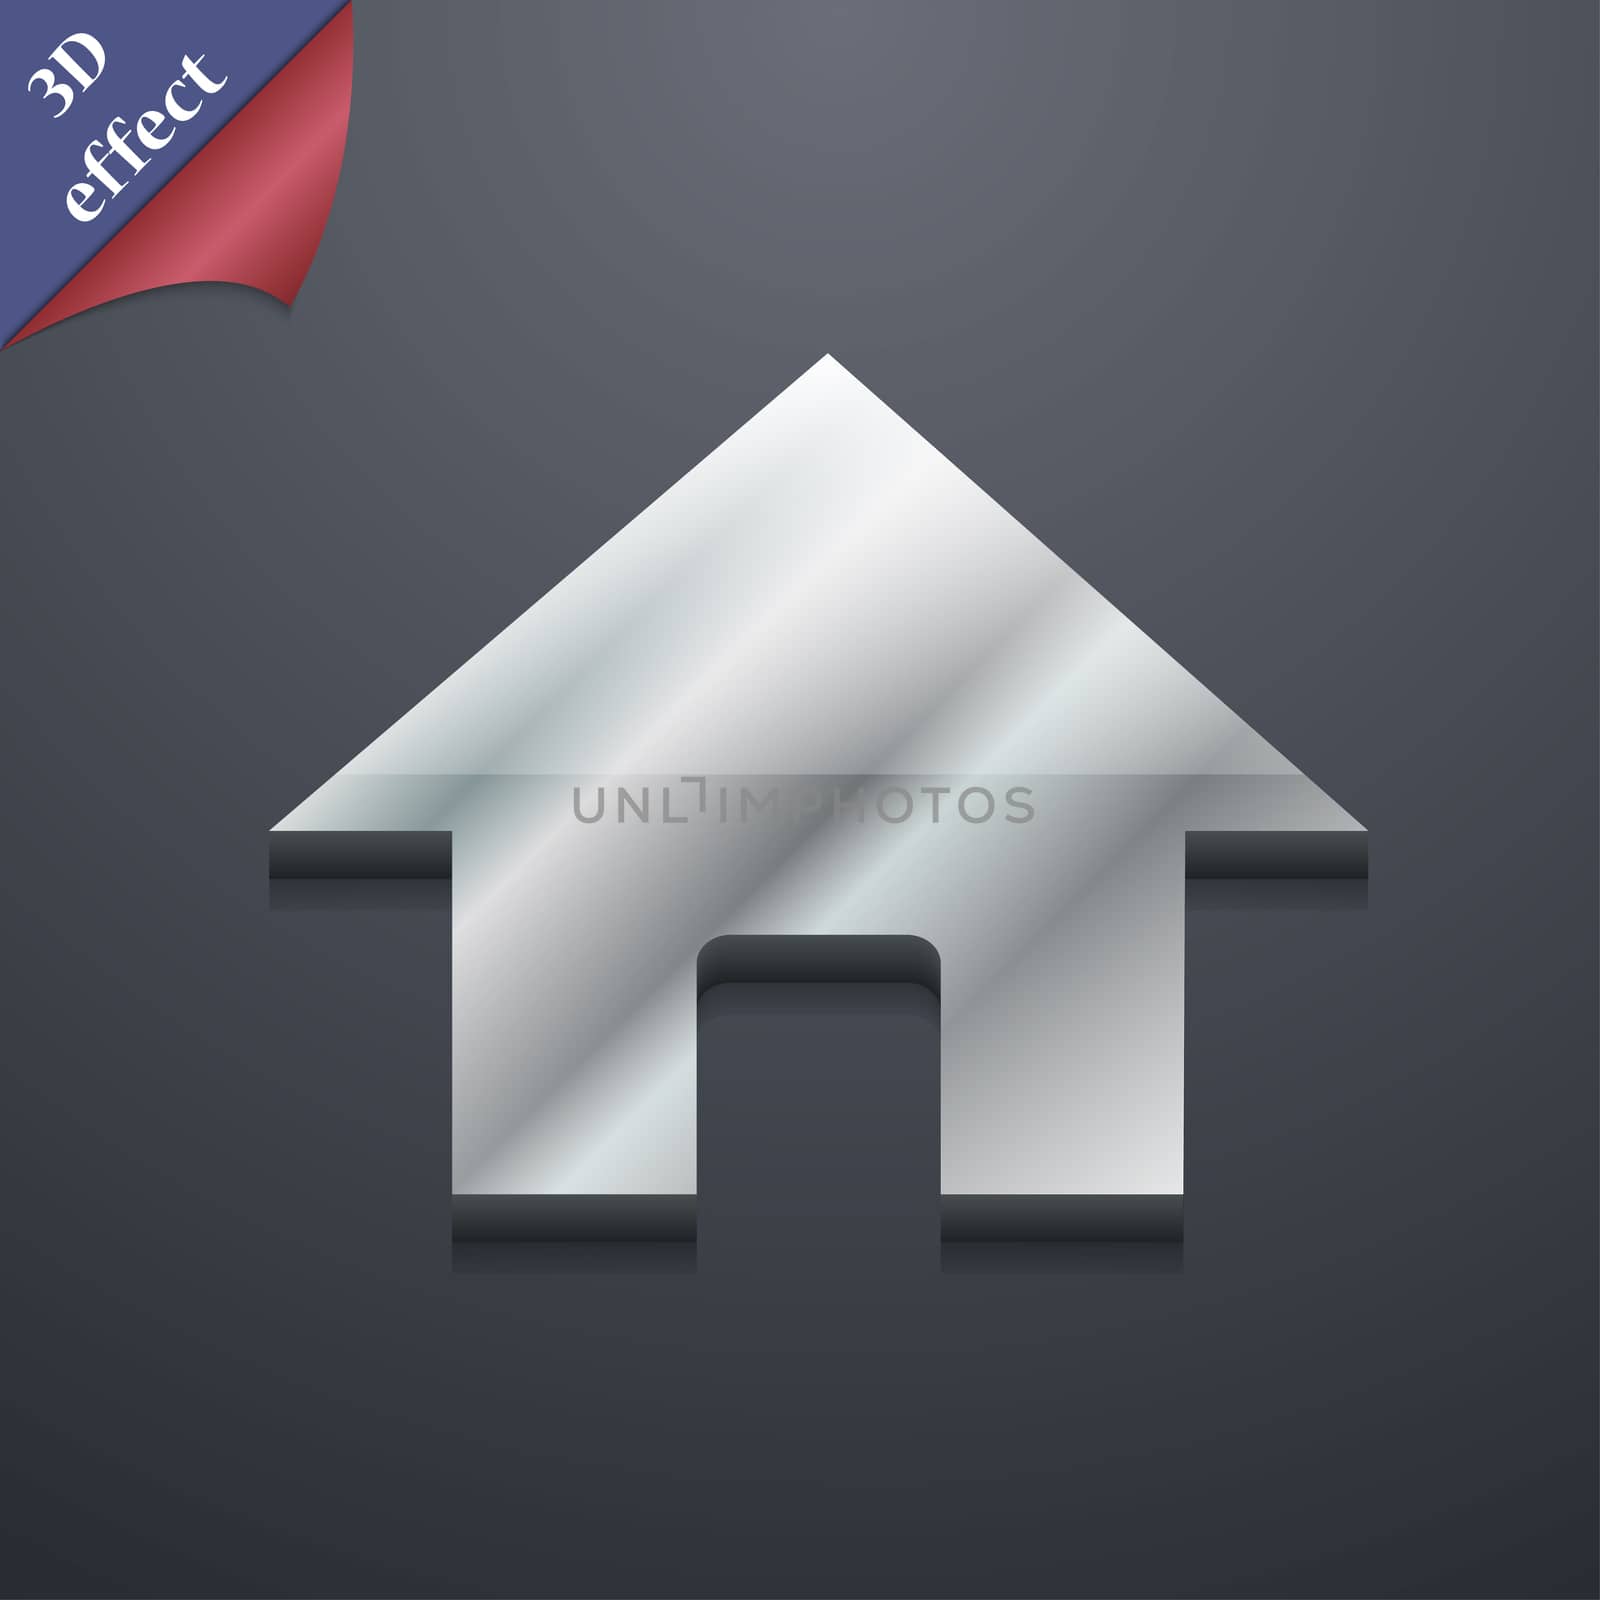 Home, Main page icon symbol. 3D style. Trendy, modern design with space for your text illustration. Rastrized copy